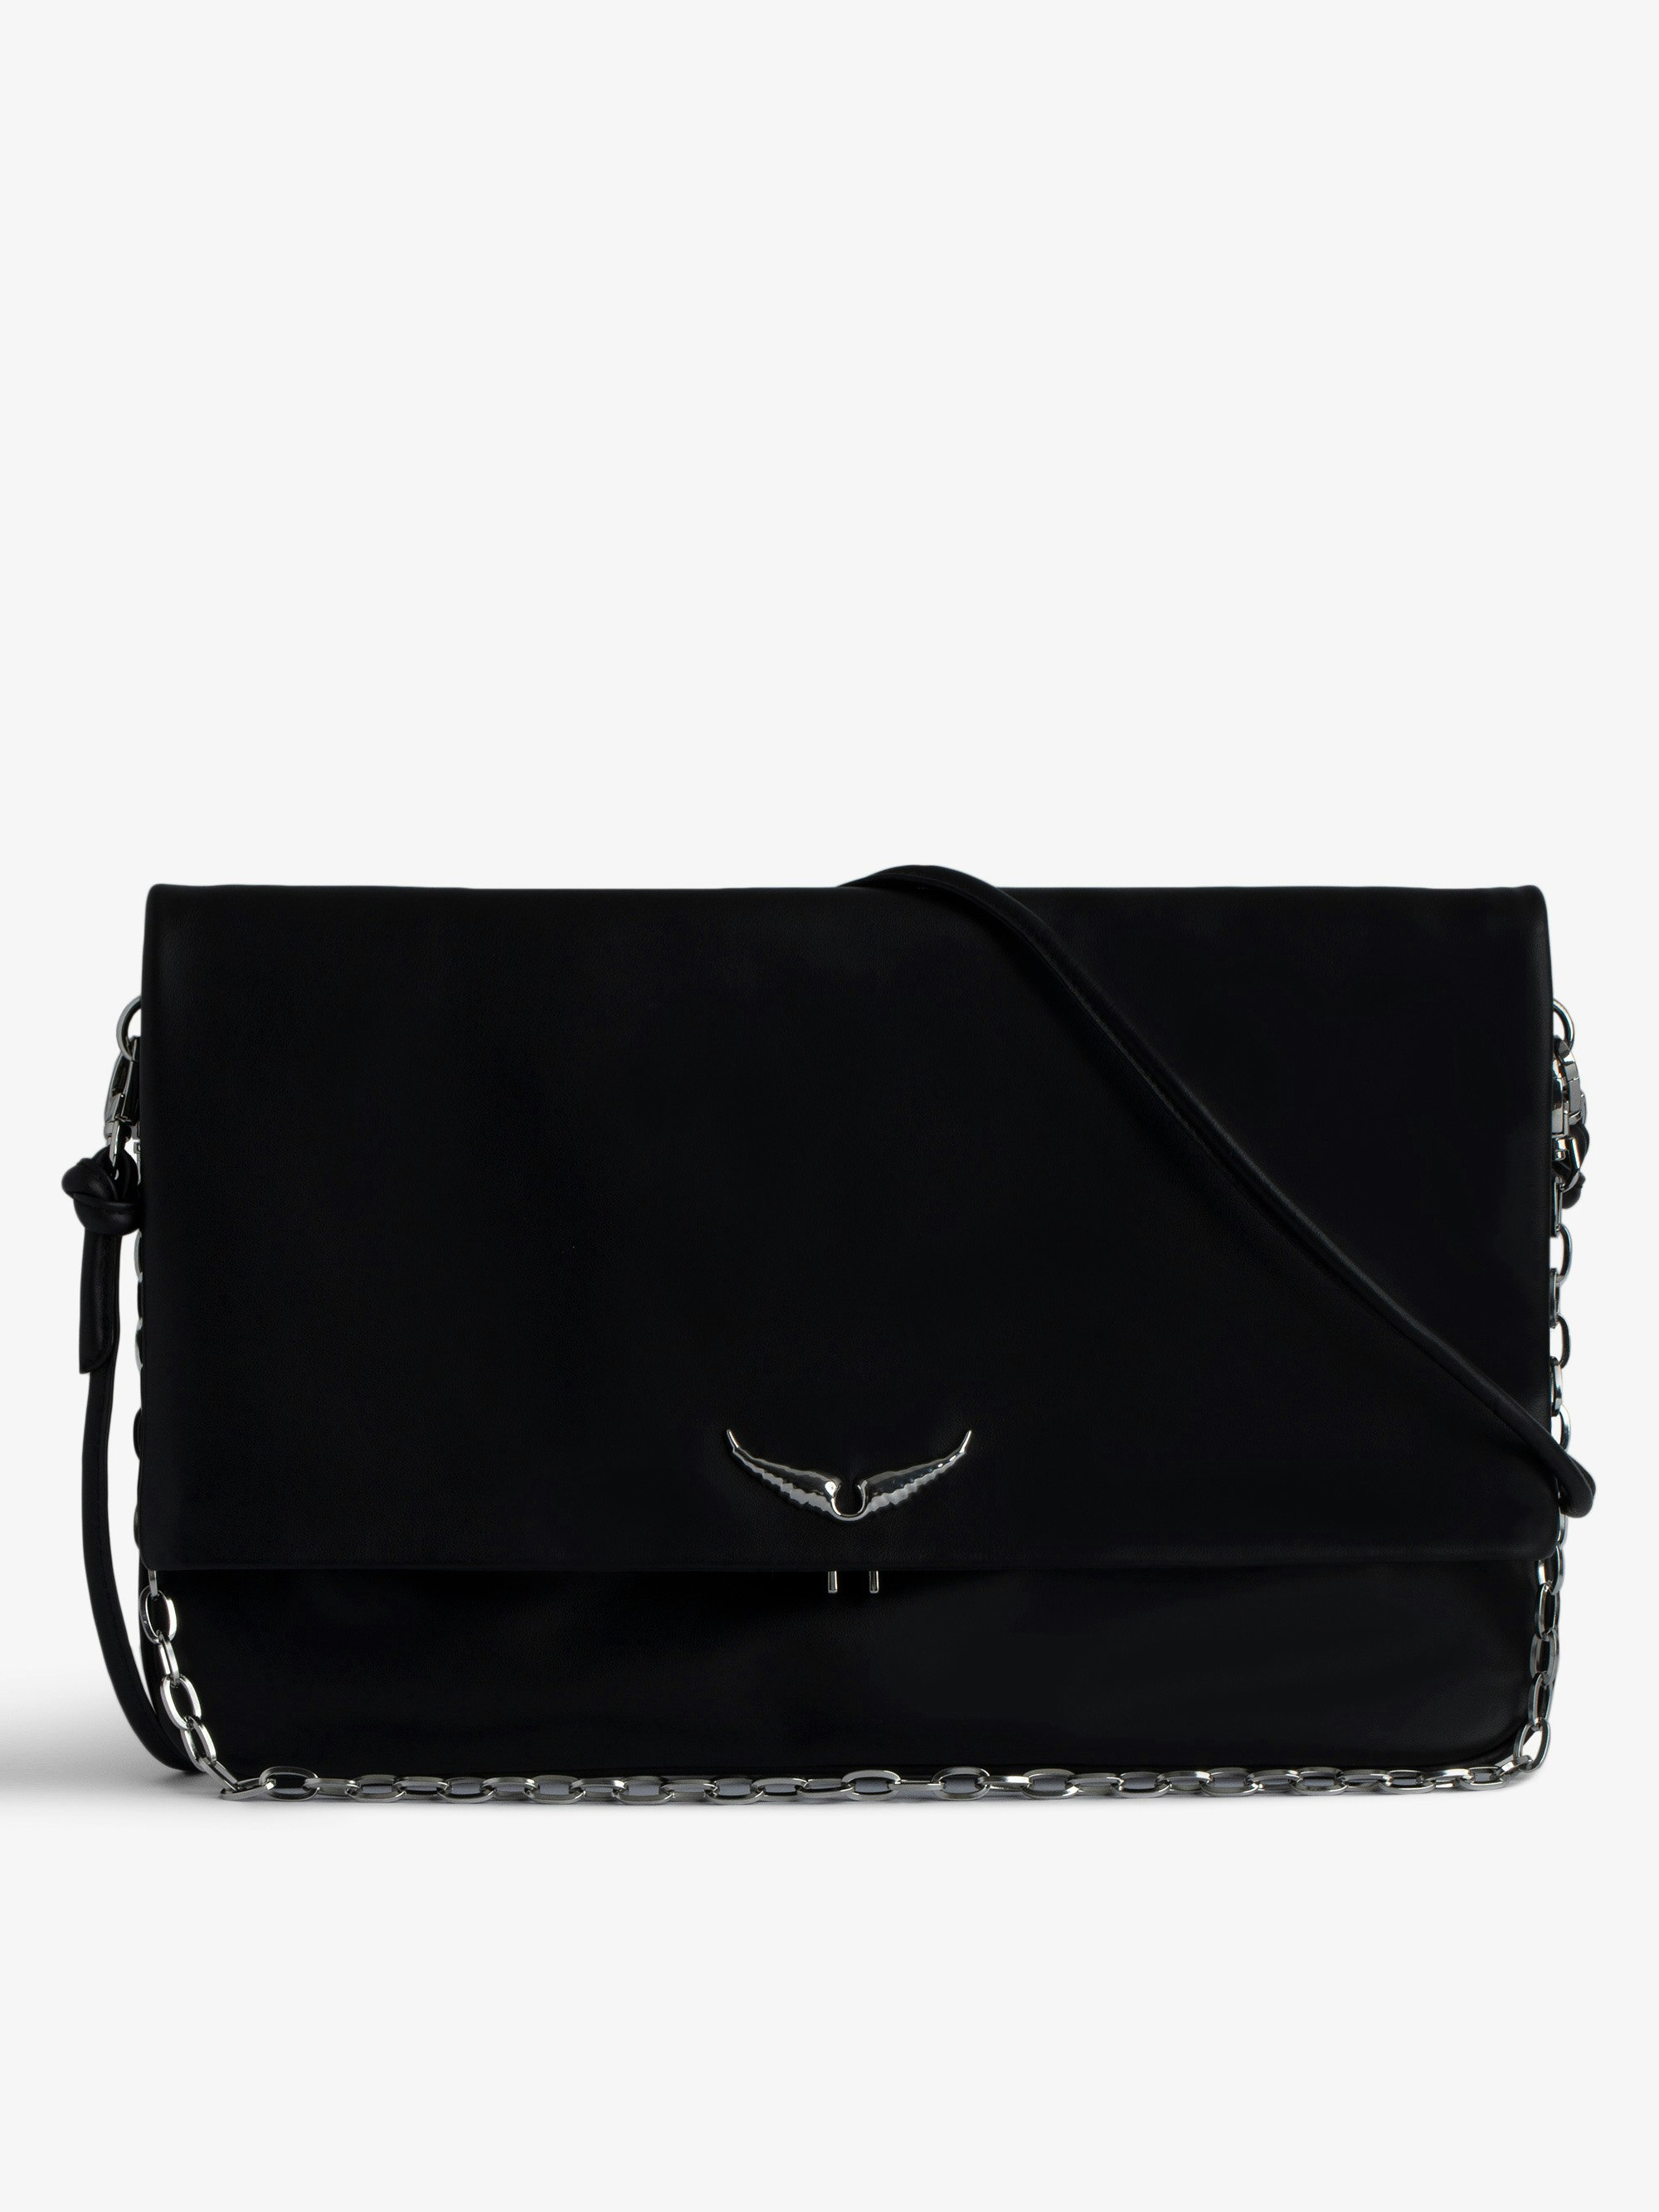 Rock Eternal XL Clutch - Rock XL black smooth leather clutch bag with double leather and metal chain strap.